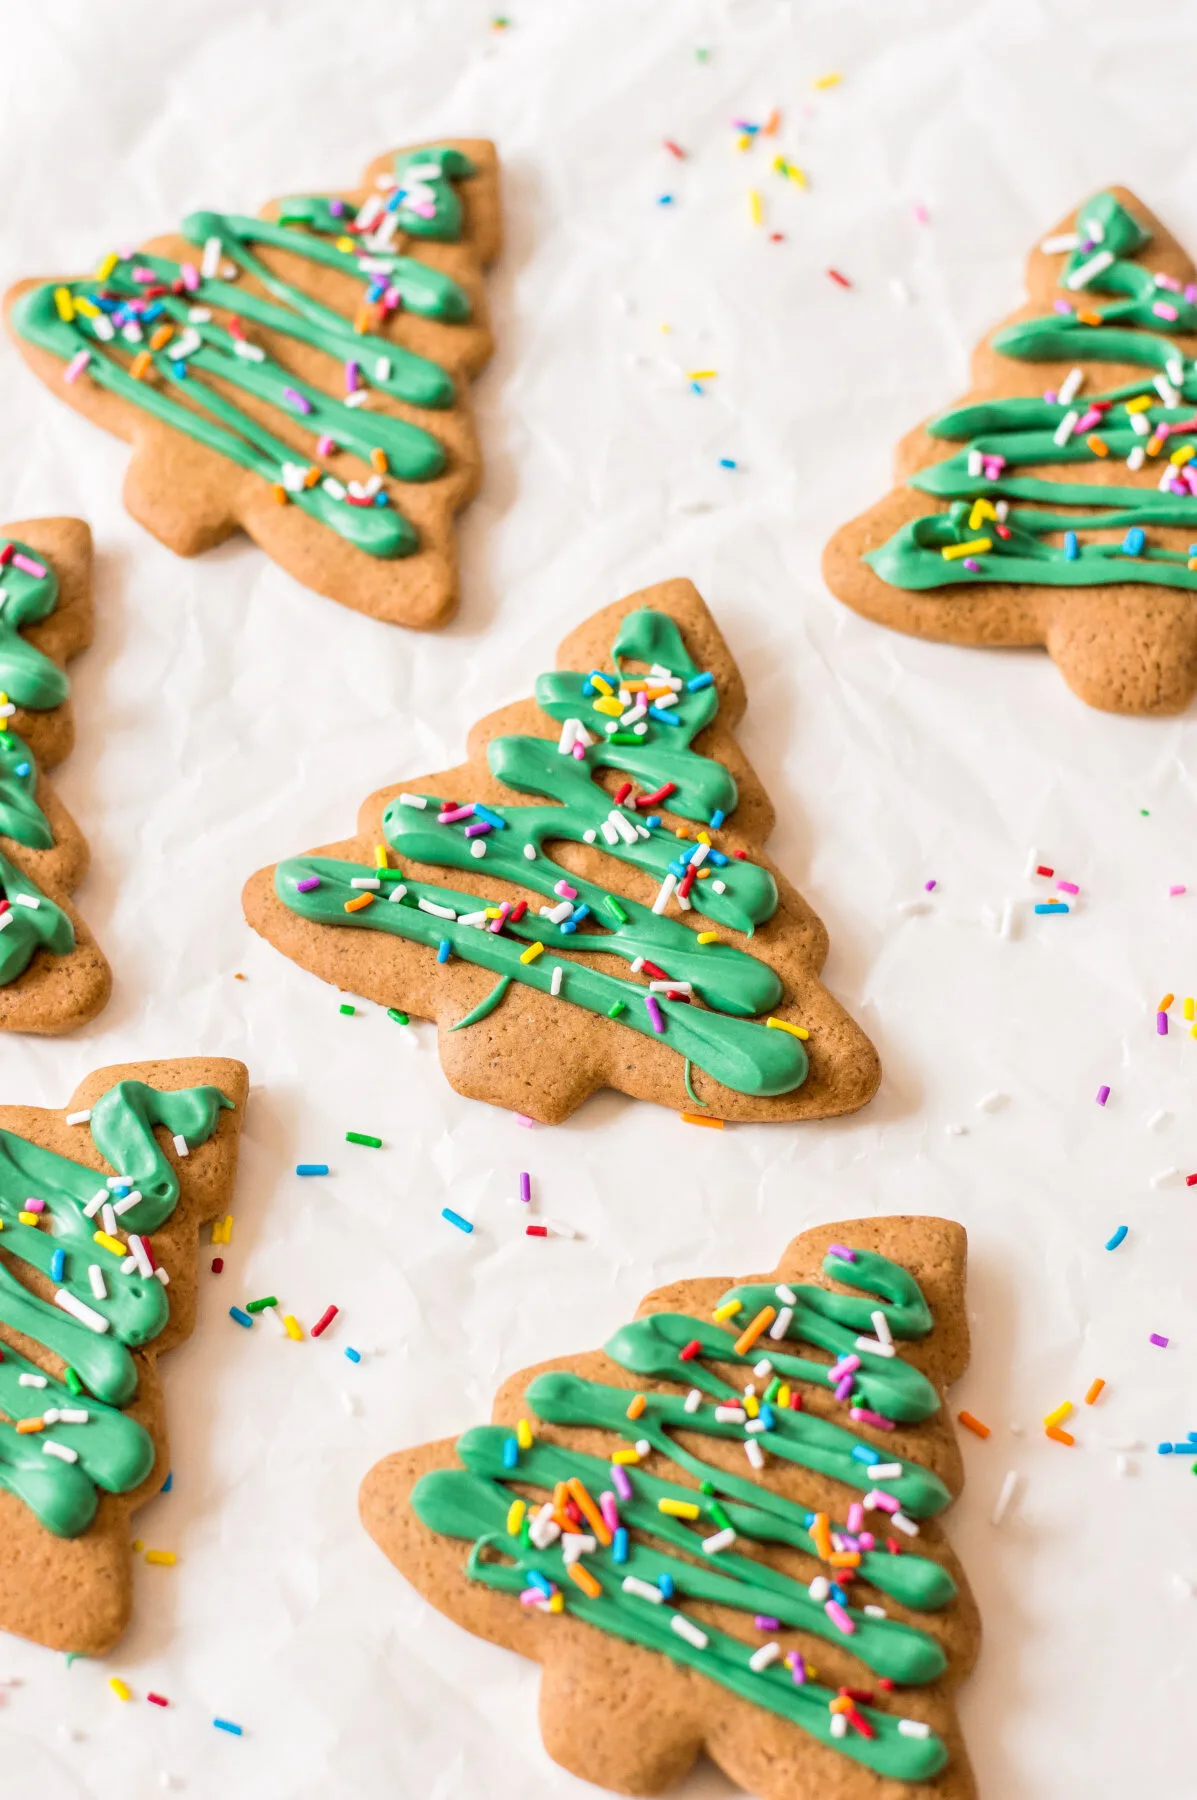 These gingerbread Christmas tree cookies are fun to make with your family. They're festive, delicious, and perfect for any holiday party!